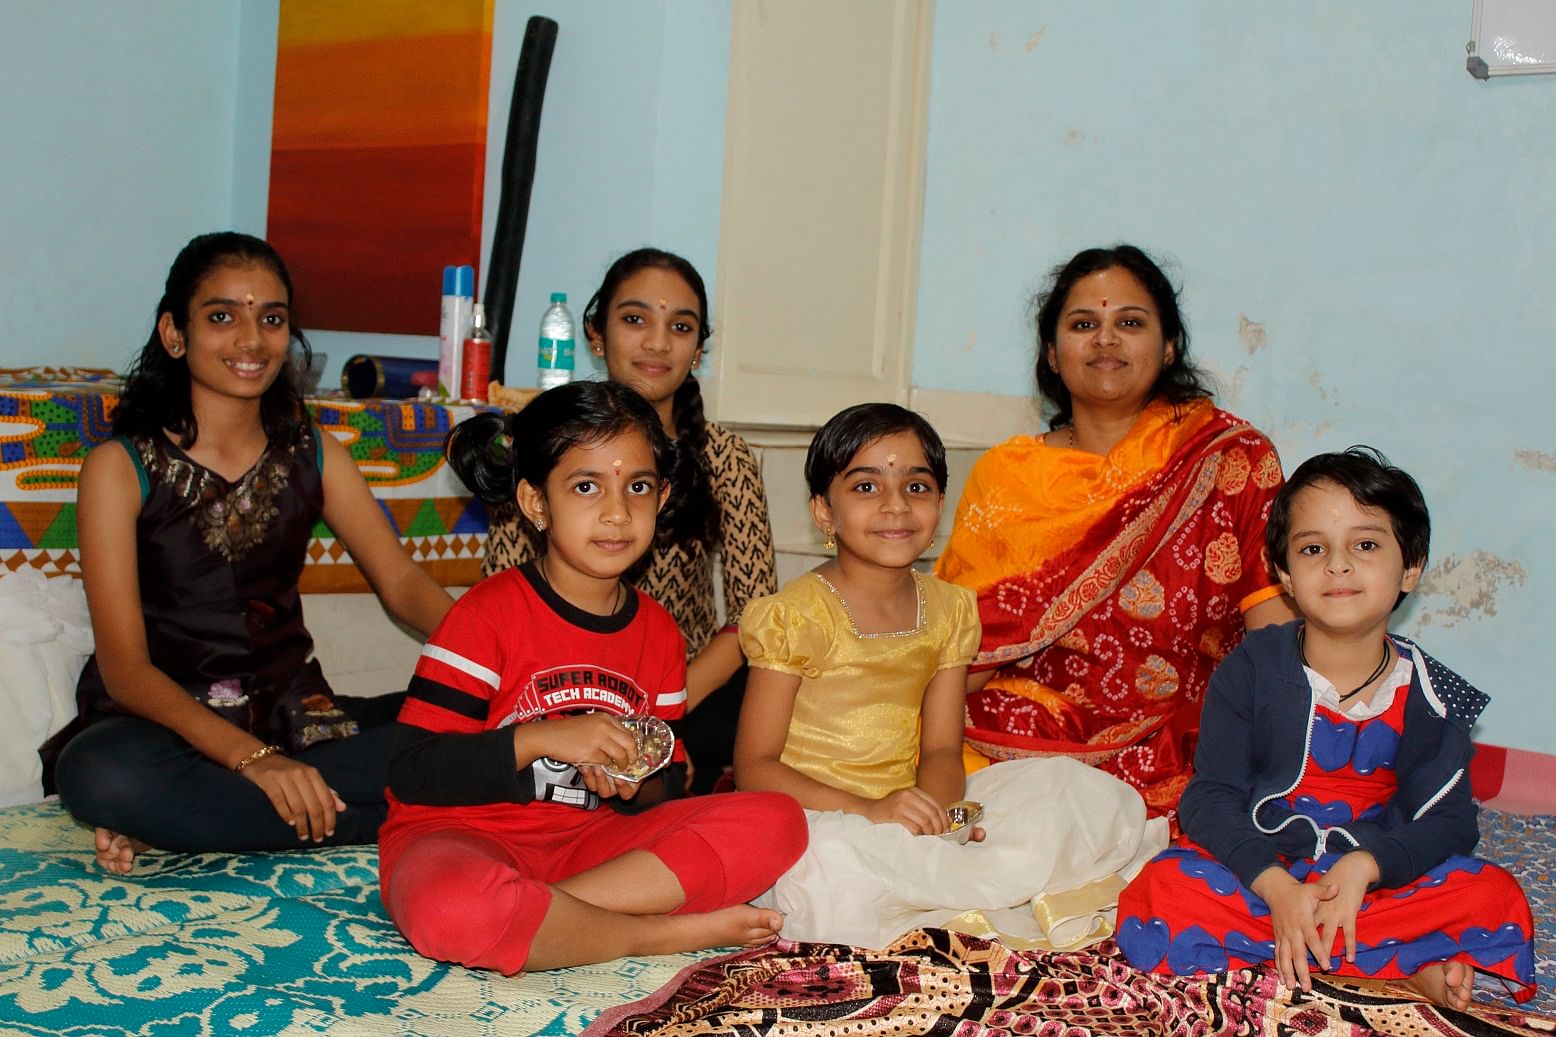 Mridula Arvind of Innerwaves uses many genres in her music therapy sessions.